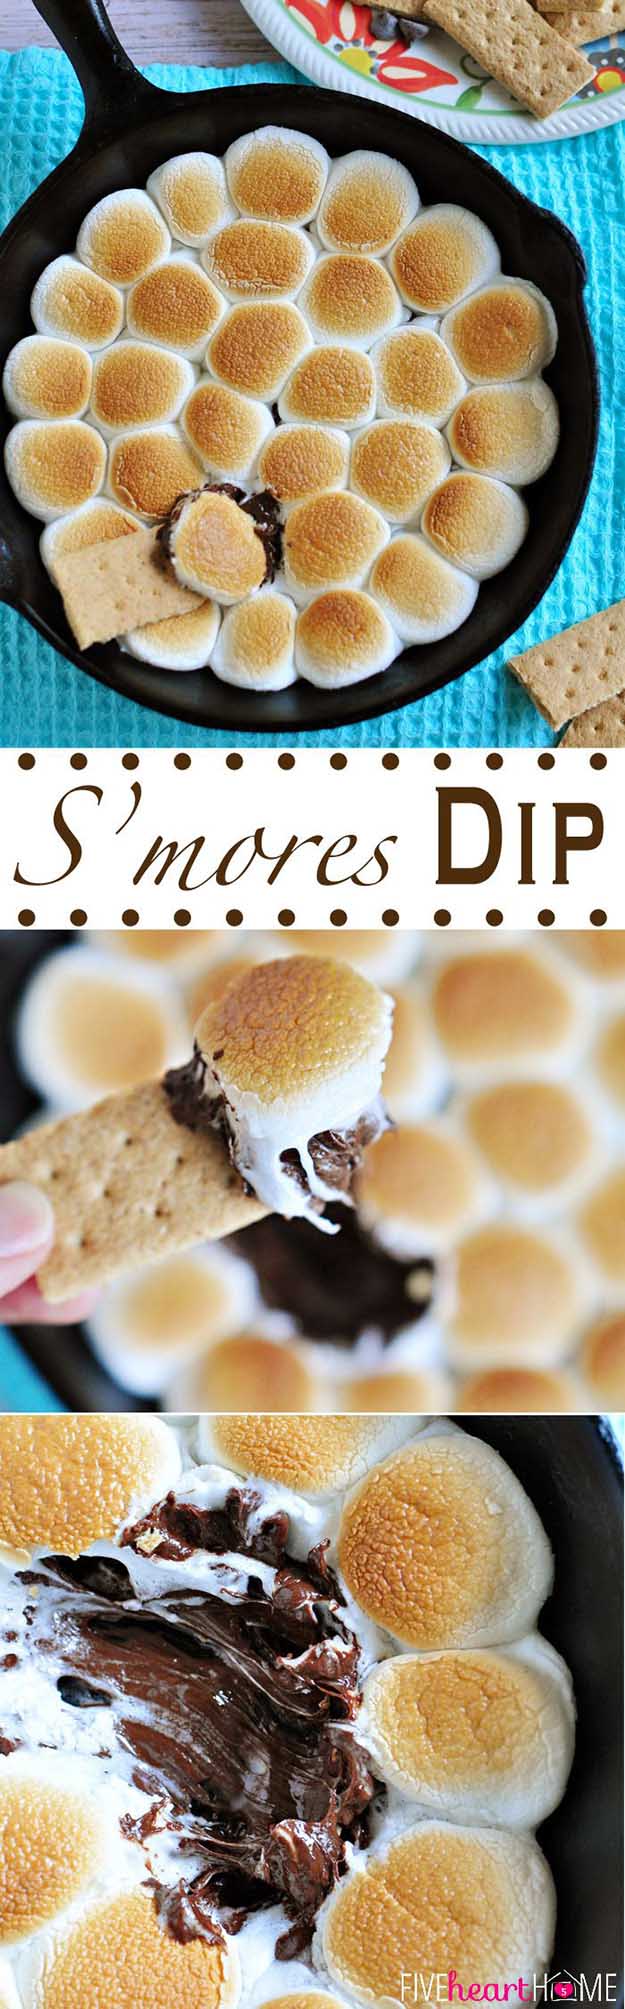 Labor Day Party Food Desserts - Baked Smores Dip Recipe - DIY Projects & Crafts by DIY JOY at http://diyjoy.com/party-ideas-labor-day-food-diy-decor